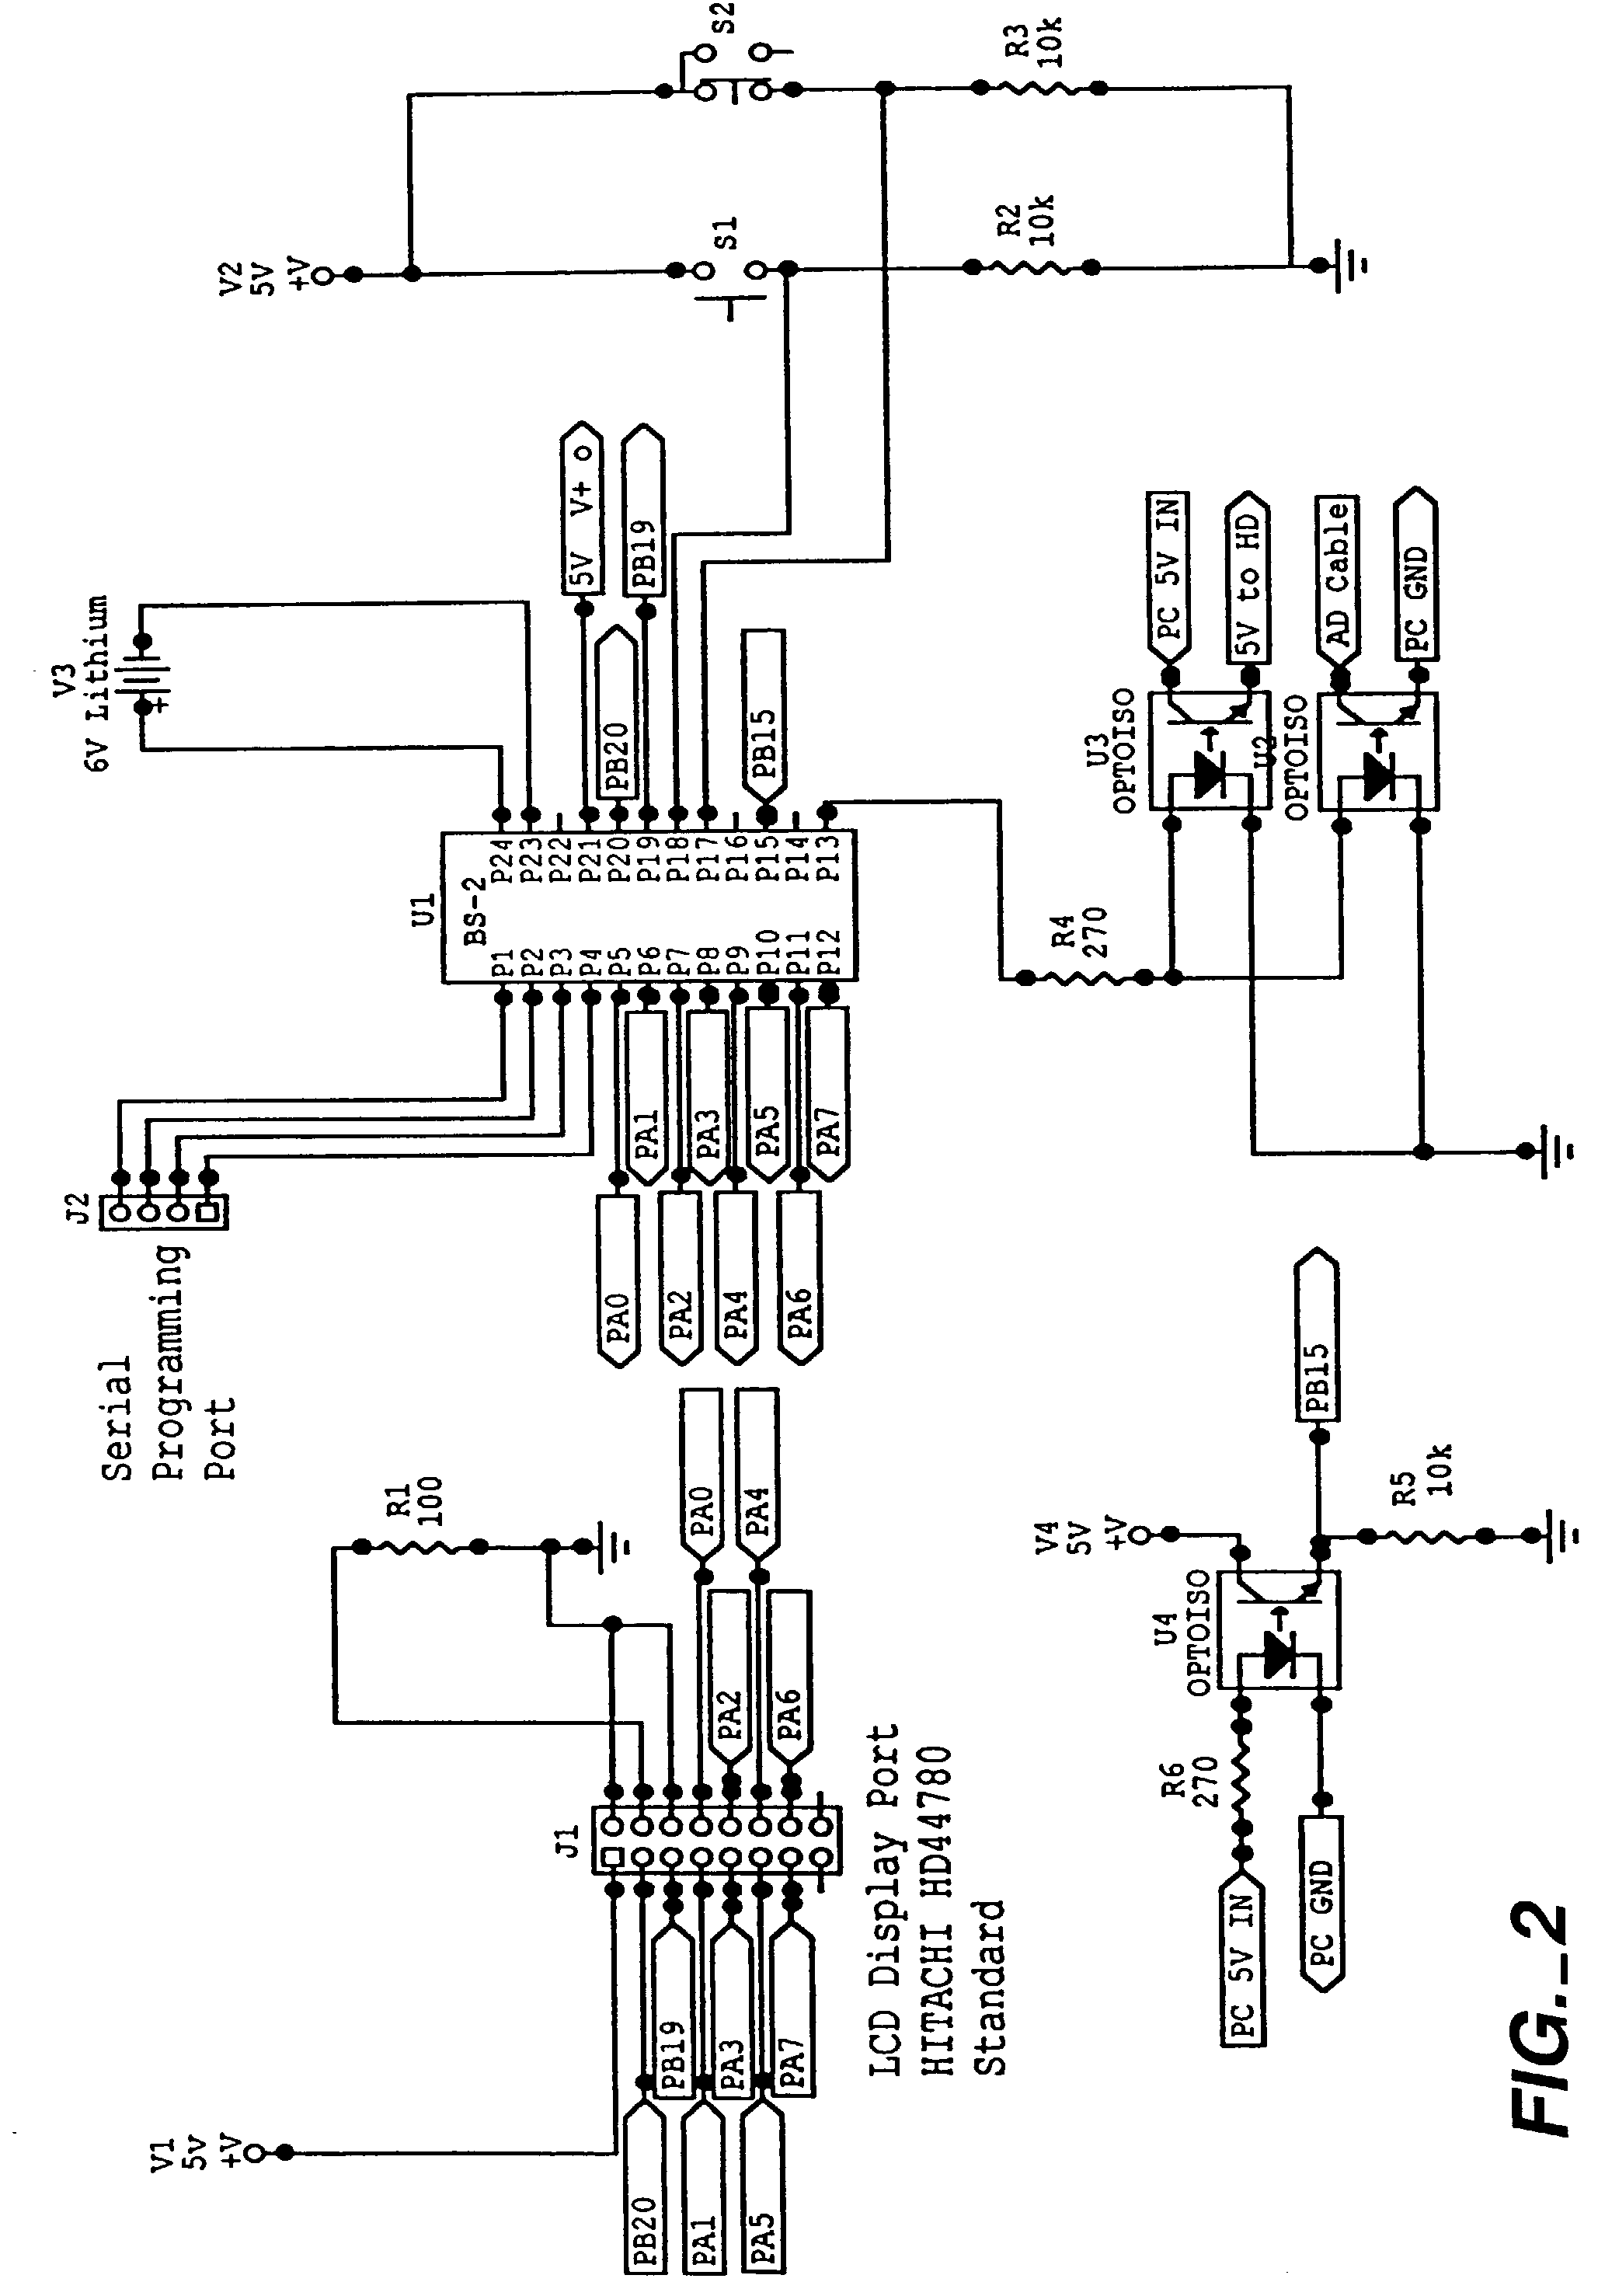 Computer with switchable components